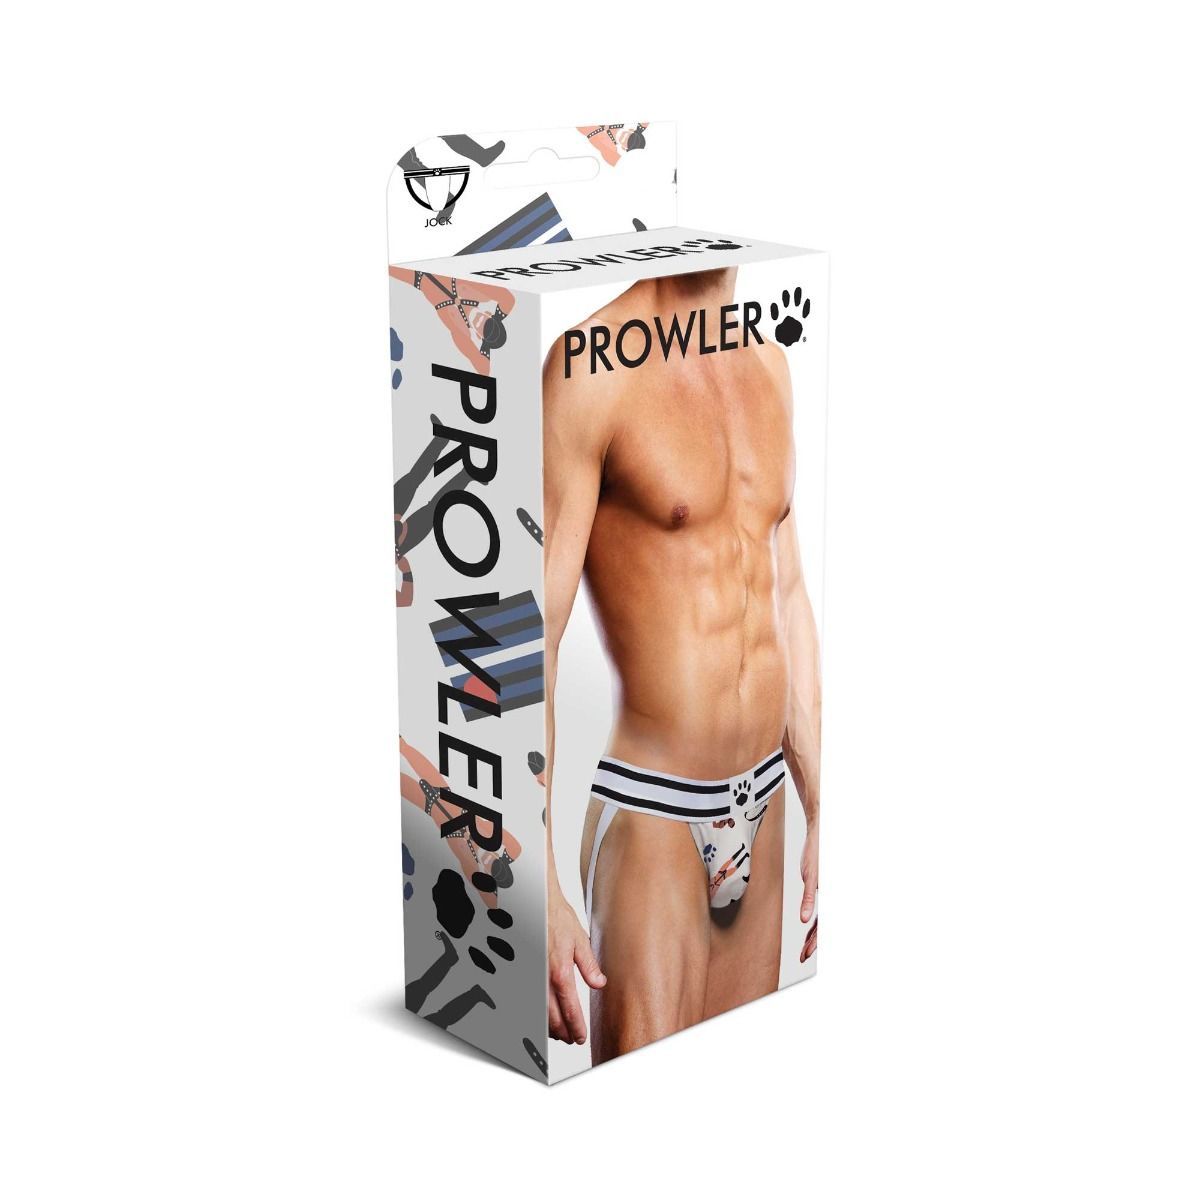 Prowler Leather Pride Jock - One Stop Adult Shop